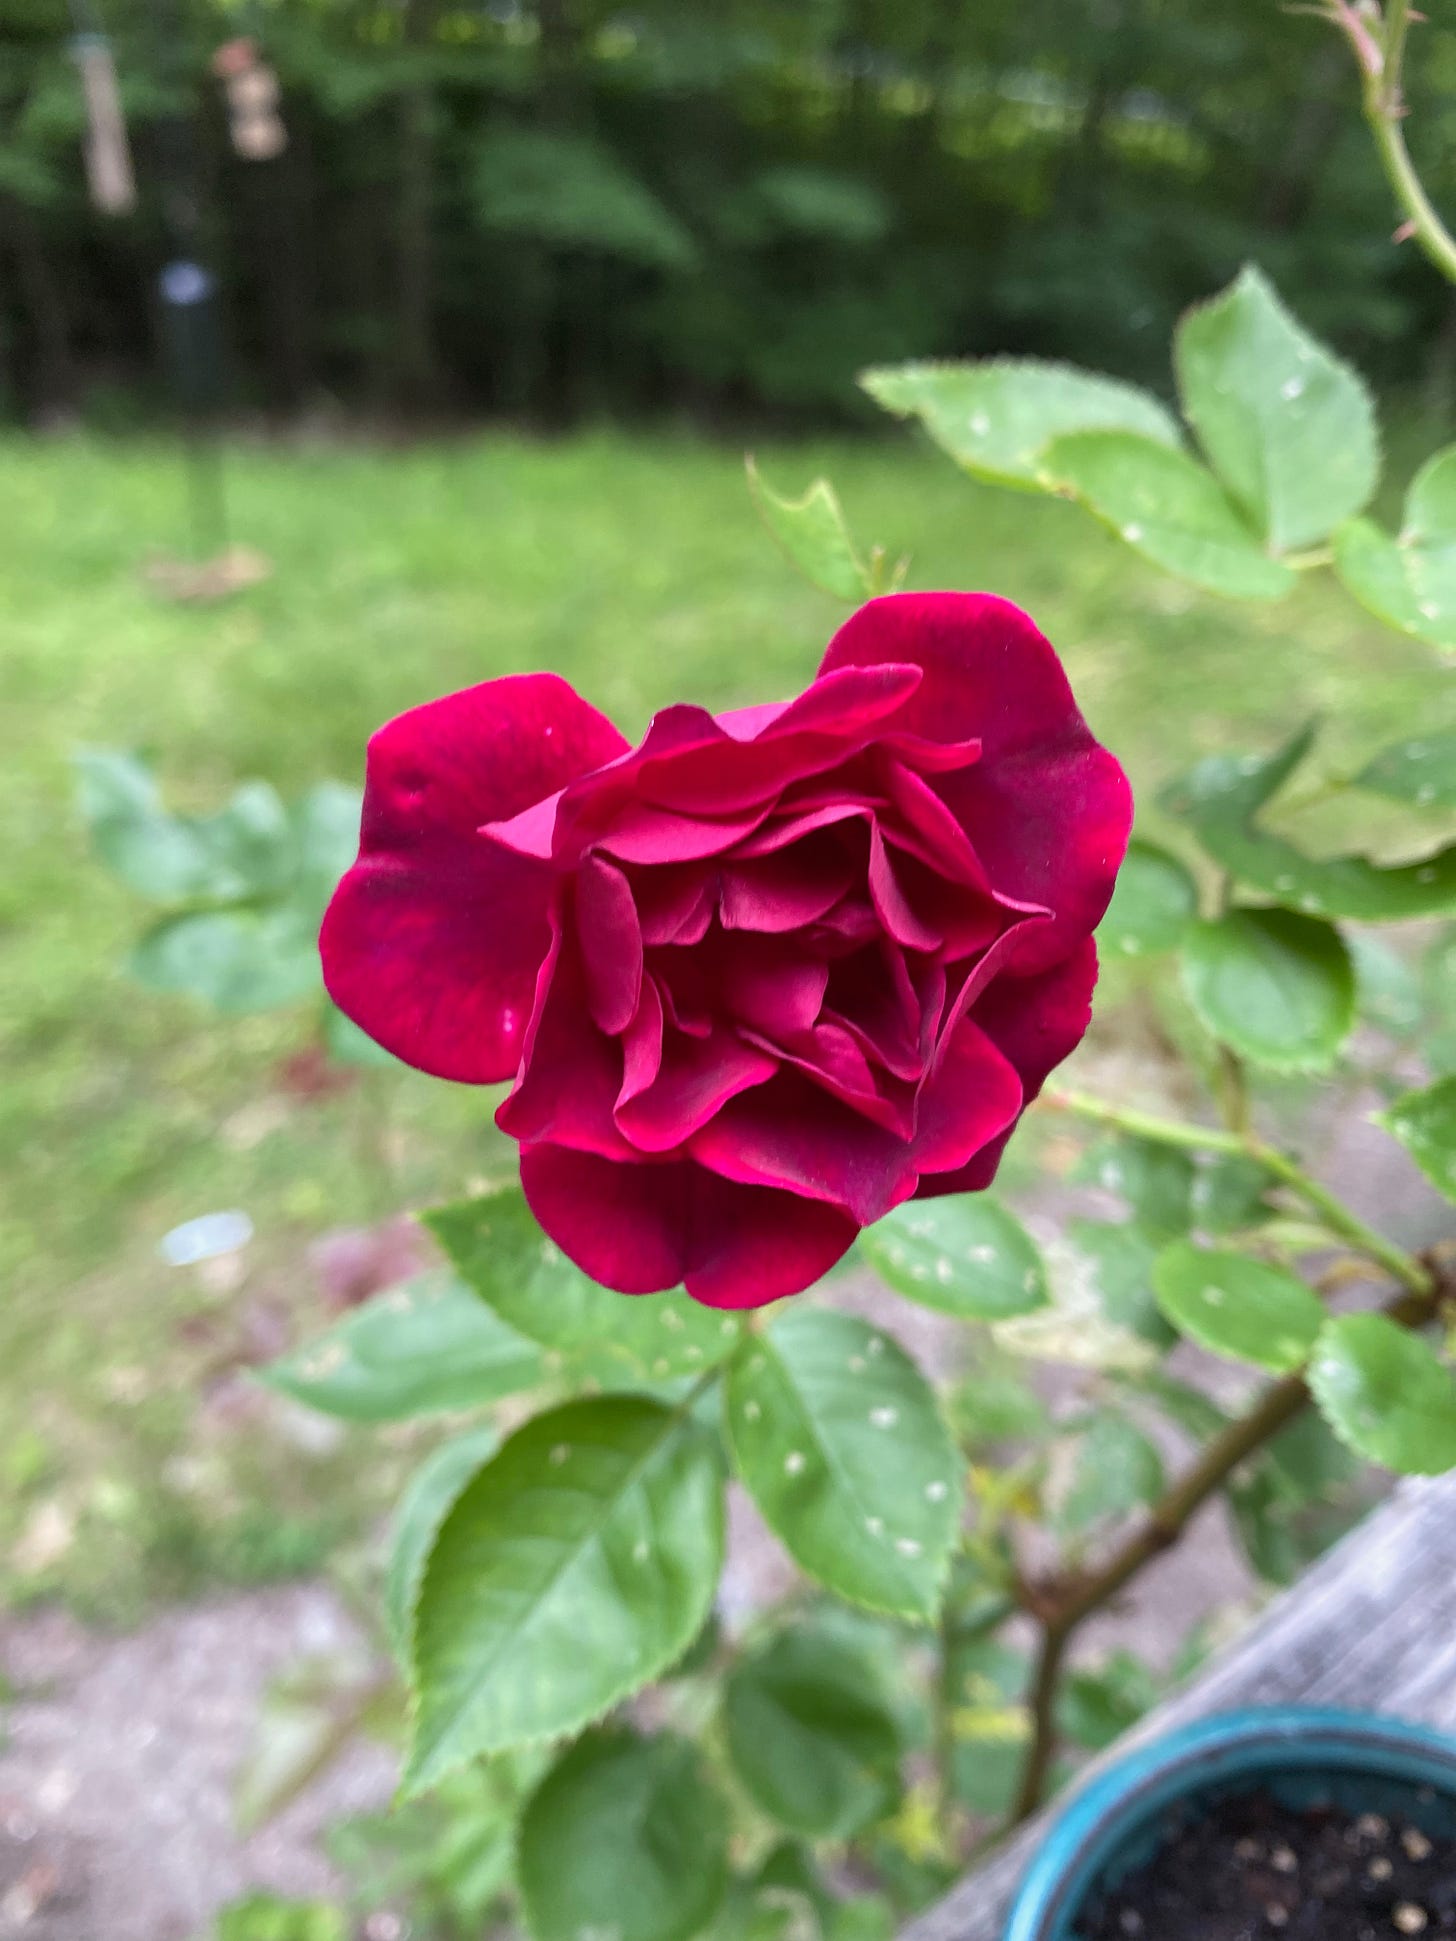 Closeup of a small red rose in front of a blurred out yard.